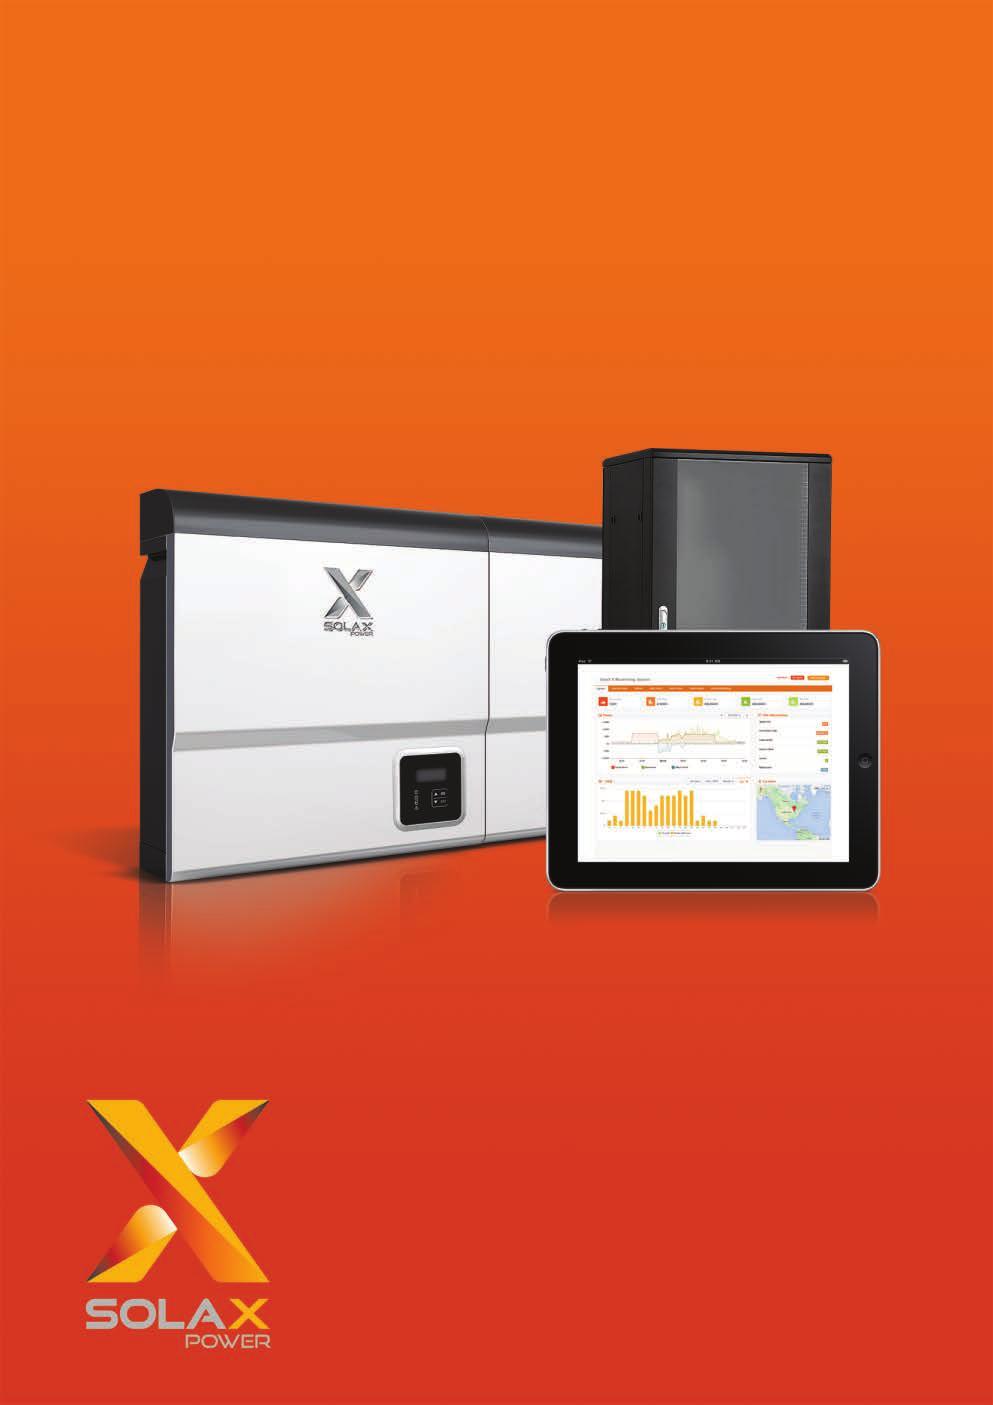 XHybr i d BATTERY STORAGE INVERTERS FROM SOLAX Sol arener gyday&ni